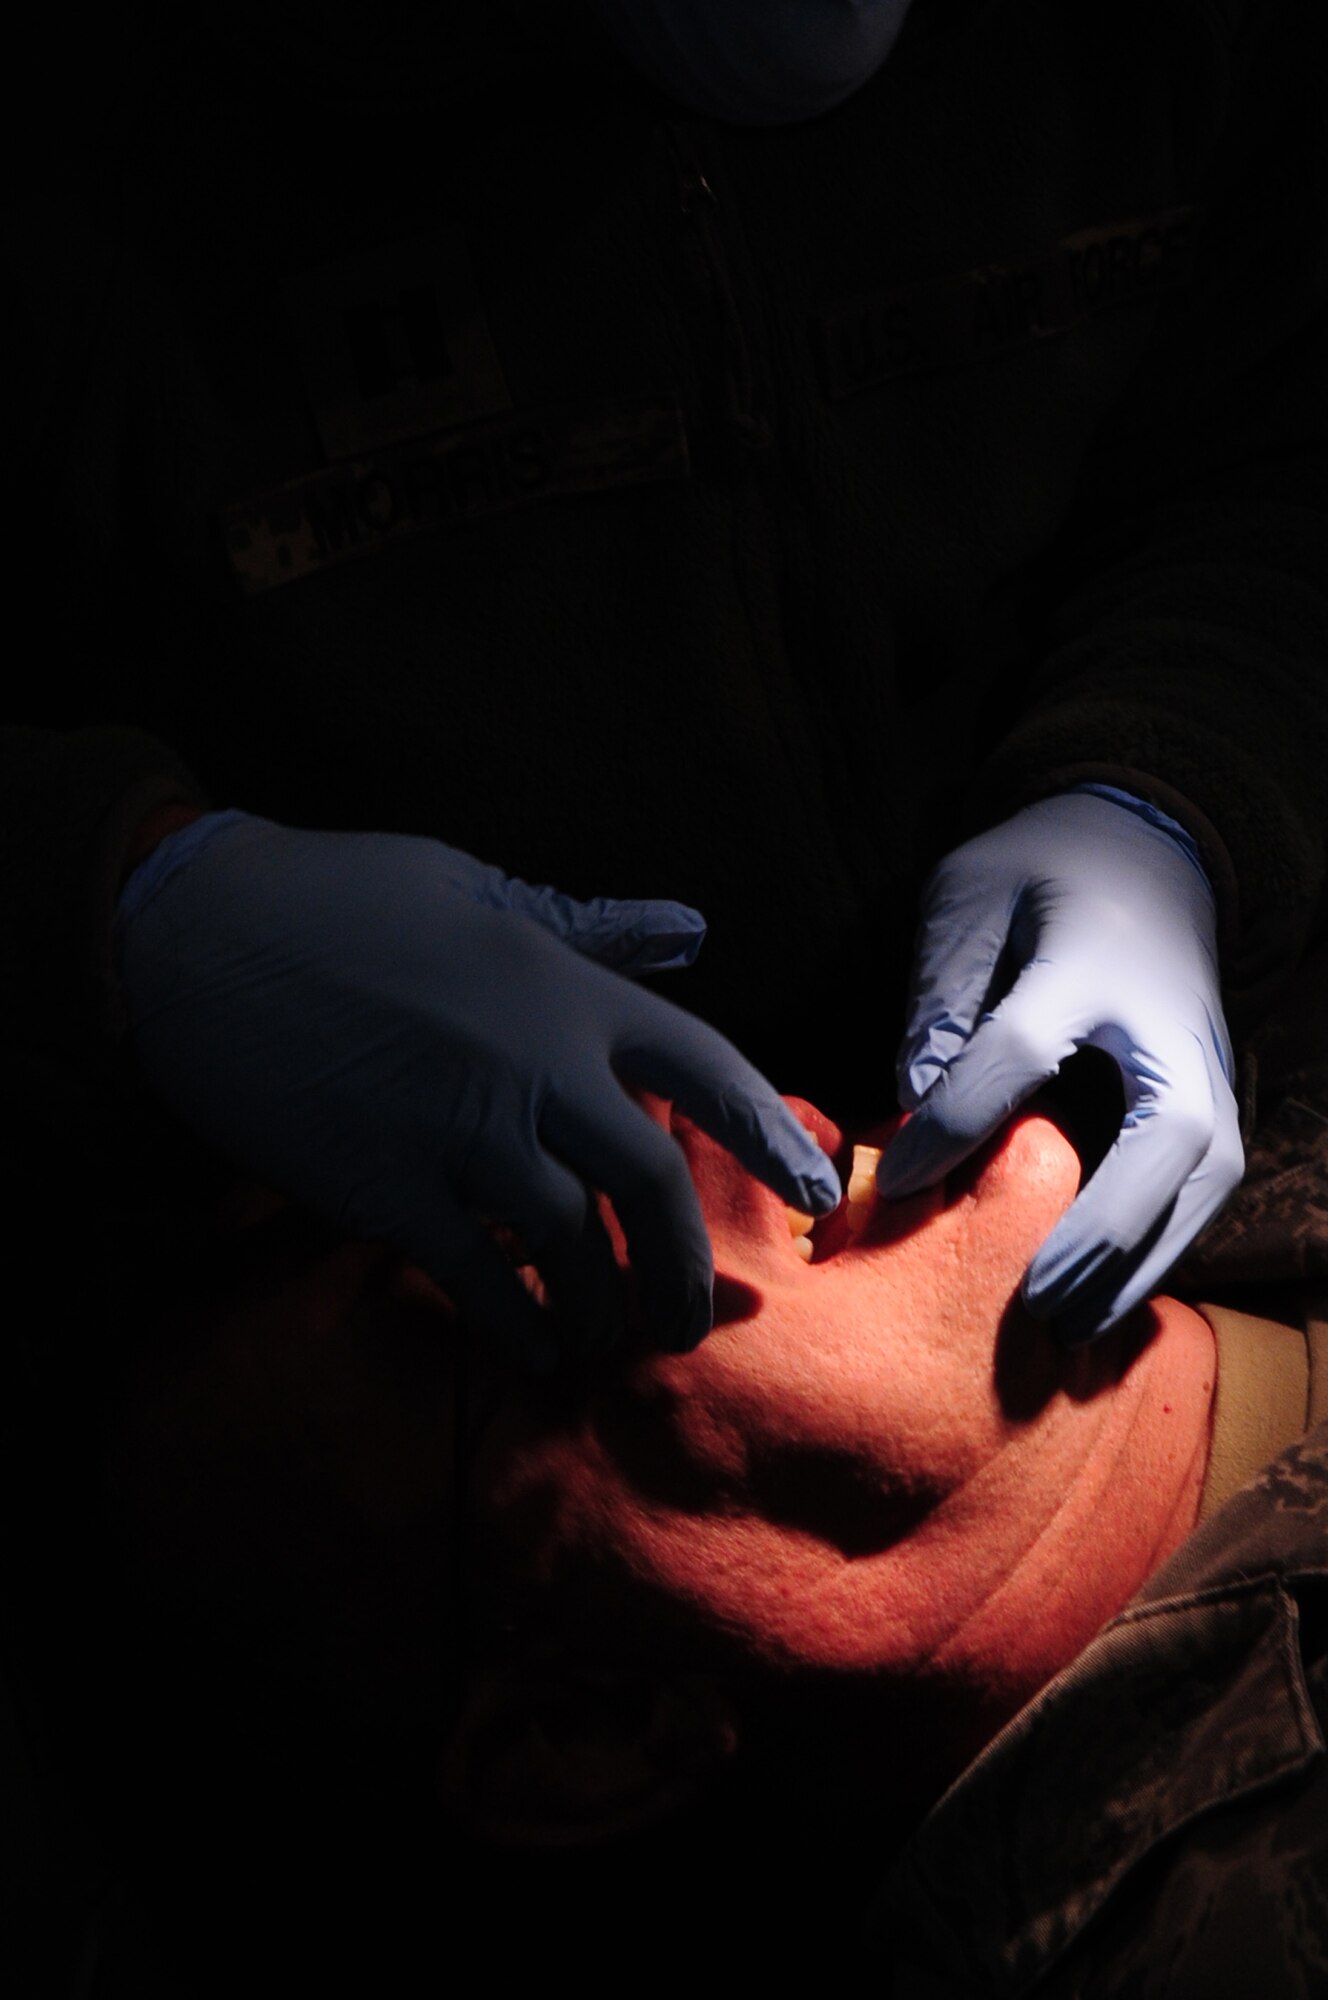 Staff Sgt. Geantel Ovalle-Escobar, 86th Medical Group dental technician, checks a patient for a chipped tooth during an expeditionary Medical Support Exercise, Ramstein Air Base, Dec. 01, 2011. EMEDS was a week-long exercise for the 86th and 31st Medical Group to hone their skills in a mock-deployed environment. (U.S. Air Force photo by Senior Airman Aaron-Forrest Wainwright)